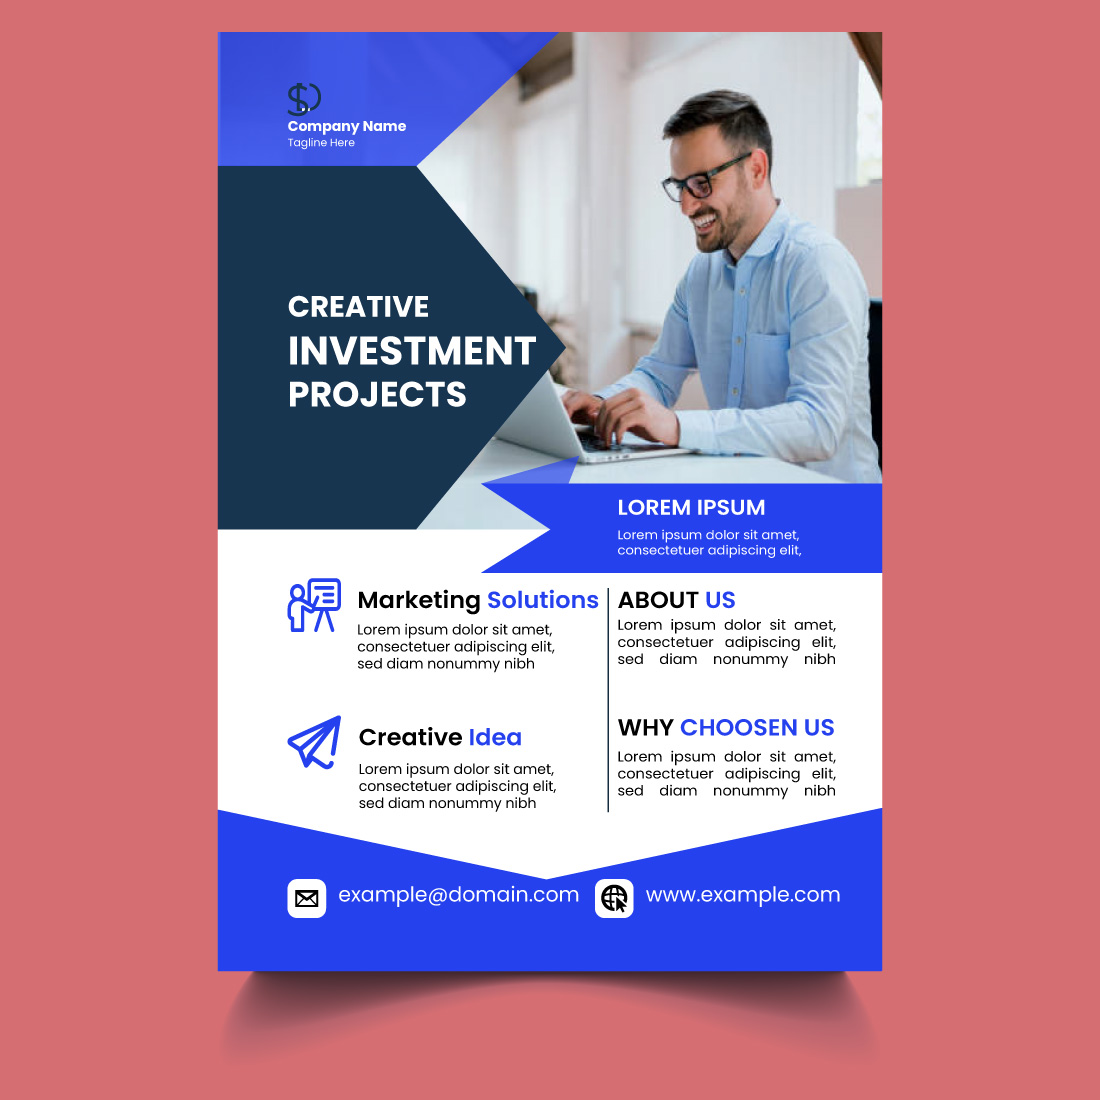 Event Management Company Flyer Template